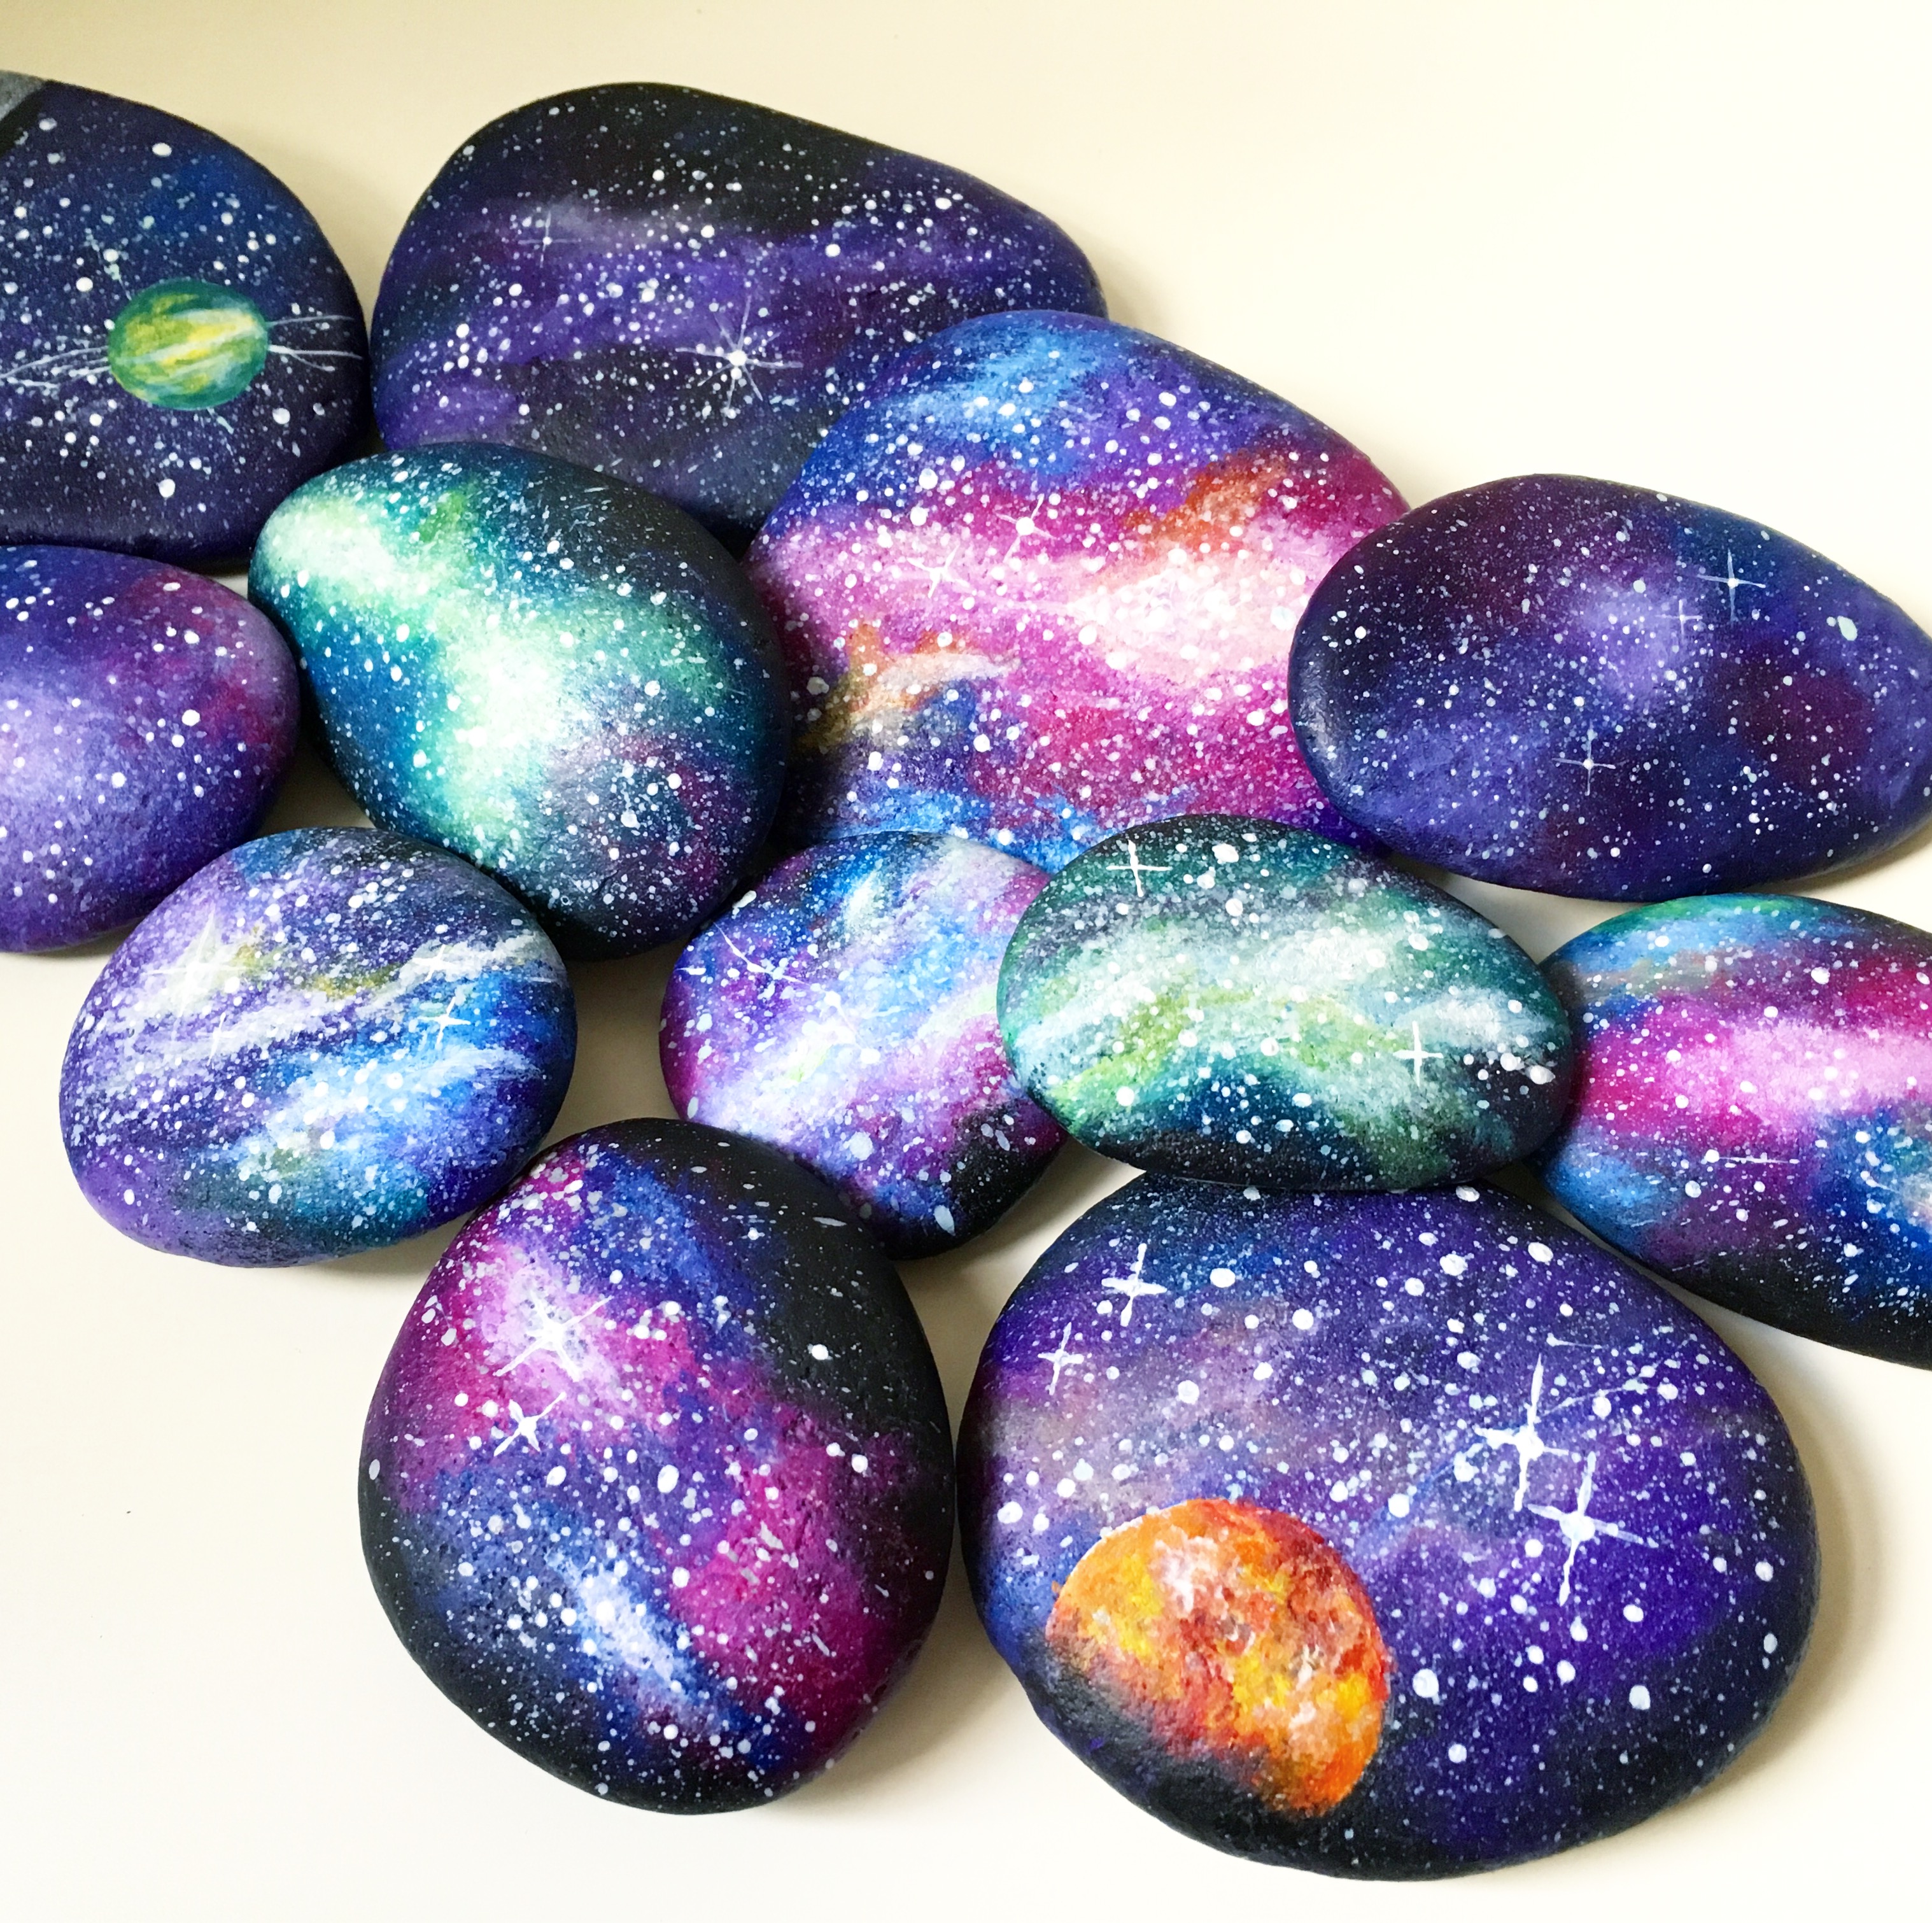 Image of painted rocks.